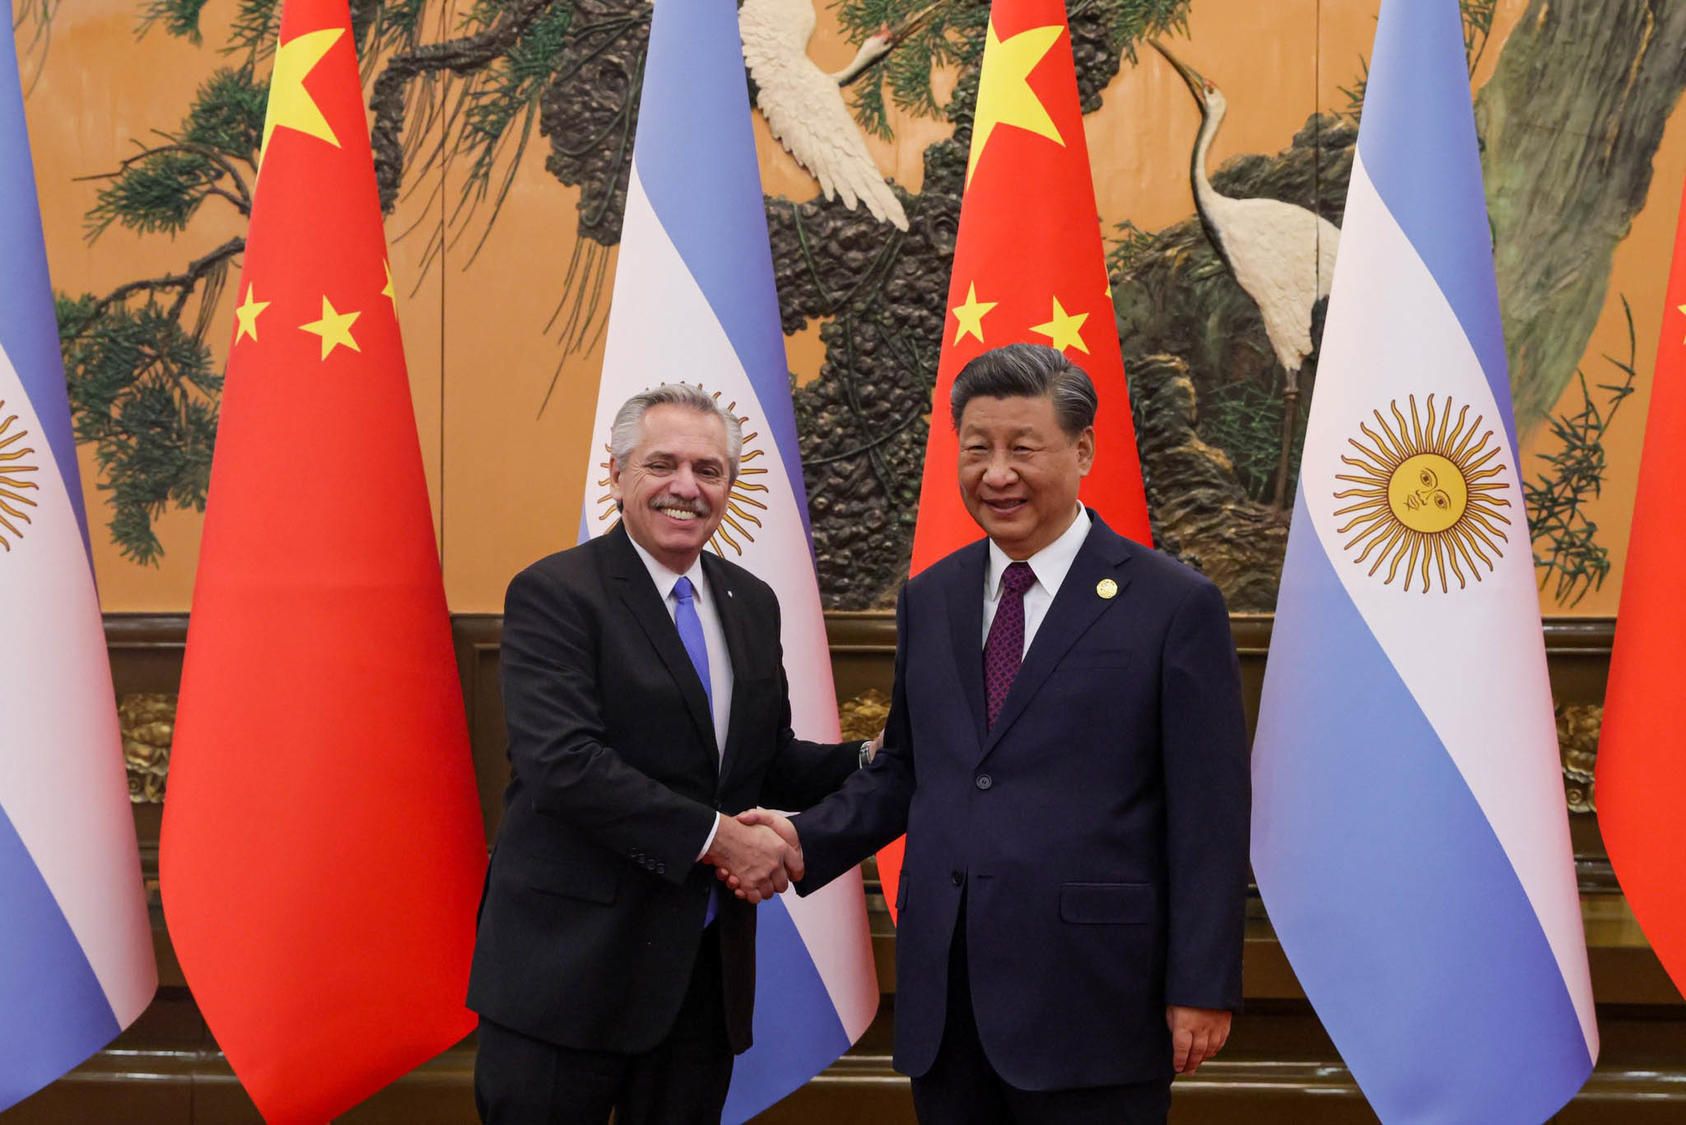 Argentine President Alberto Fernandez and Chinese President Xi Jinping meet to discuss deepening their two countries’ partnership Beijing, China, Oct. 18, 2023. (Facebook/Casa Rosada)